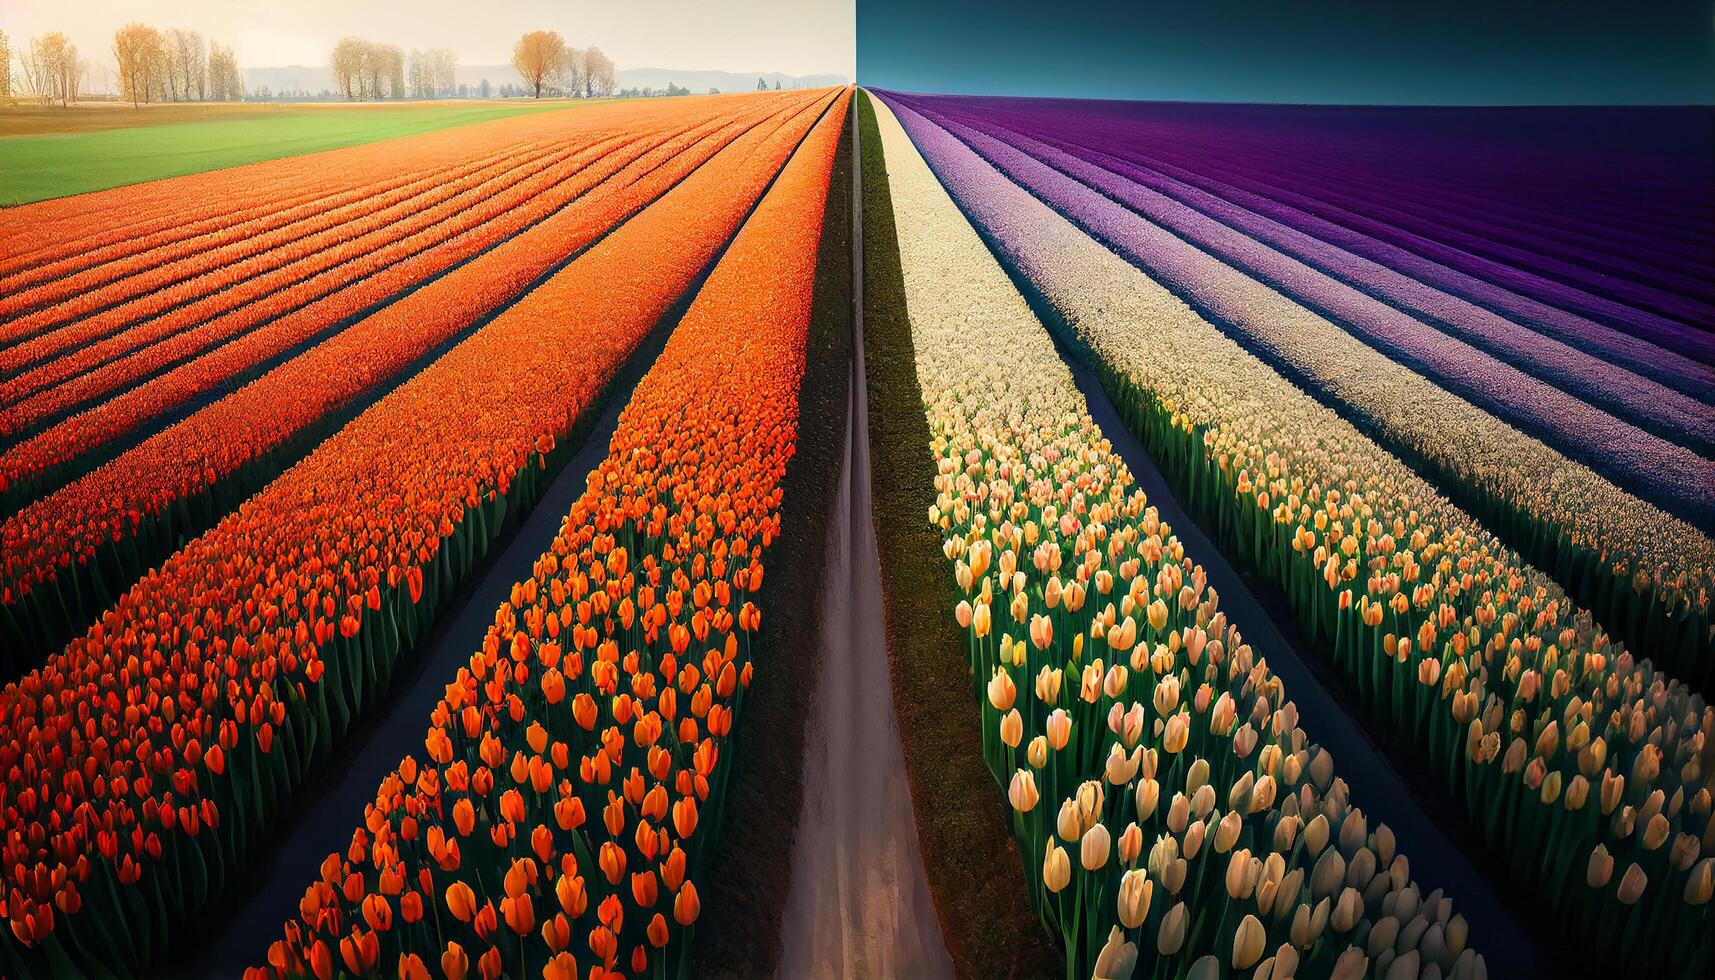 Nature beauty in agriculture meadow Multi colored tulips generated by AI photo